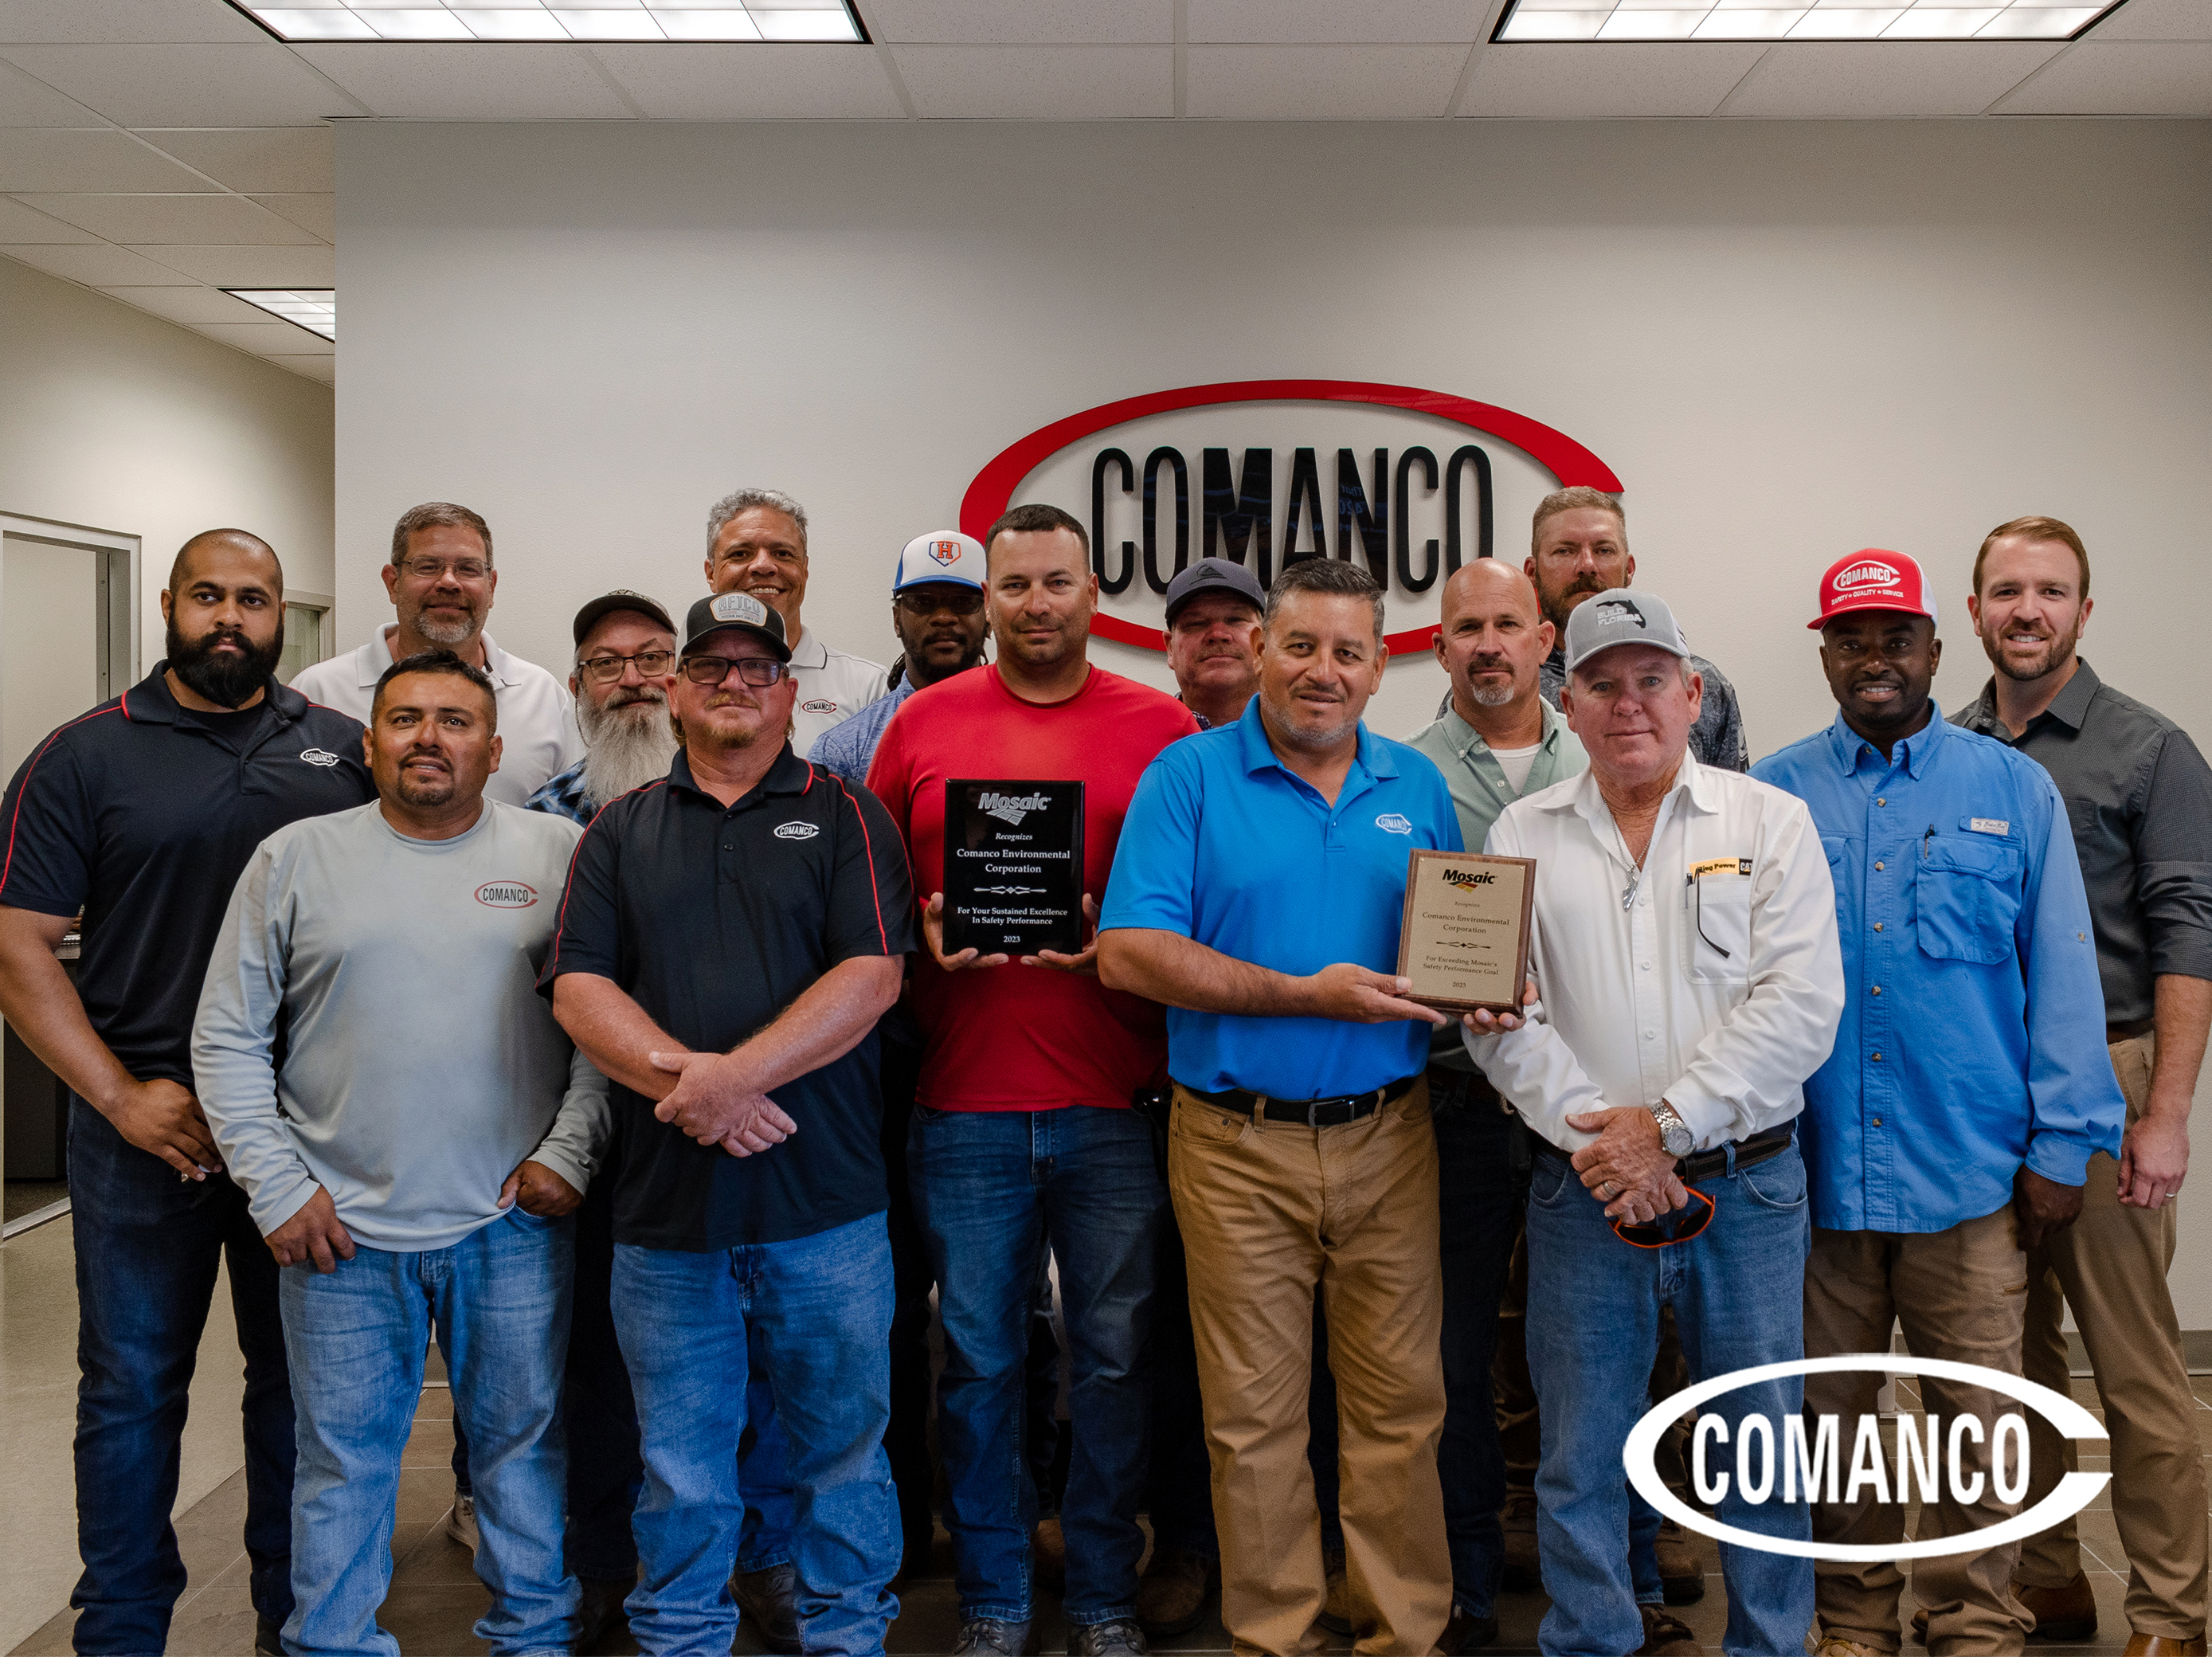 COMANCO Awarded for Safety Excellence